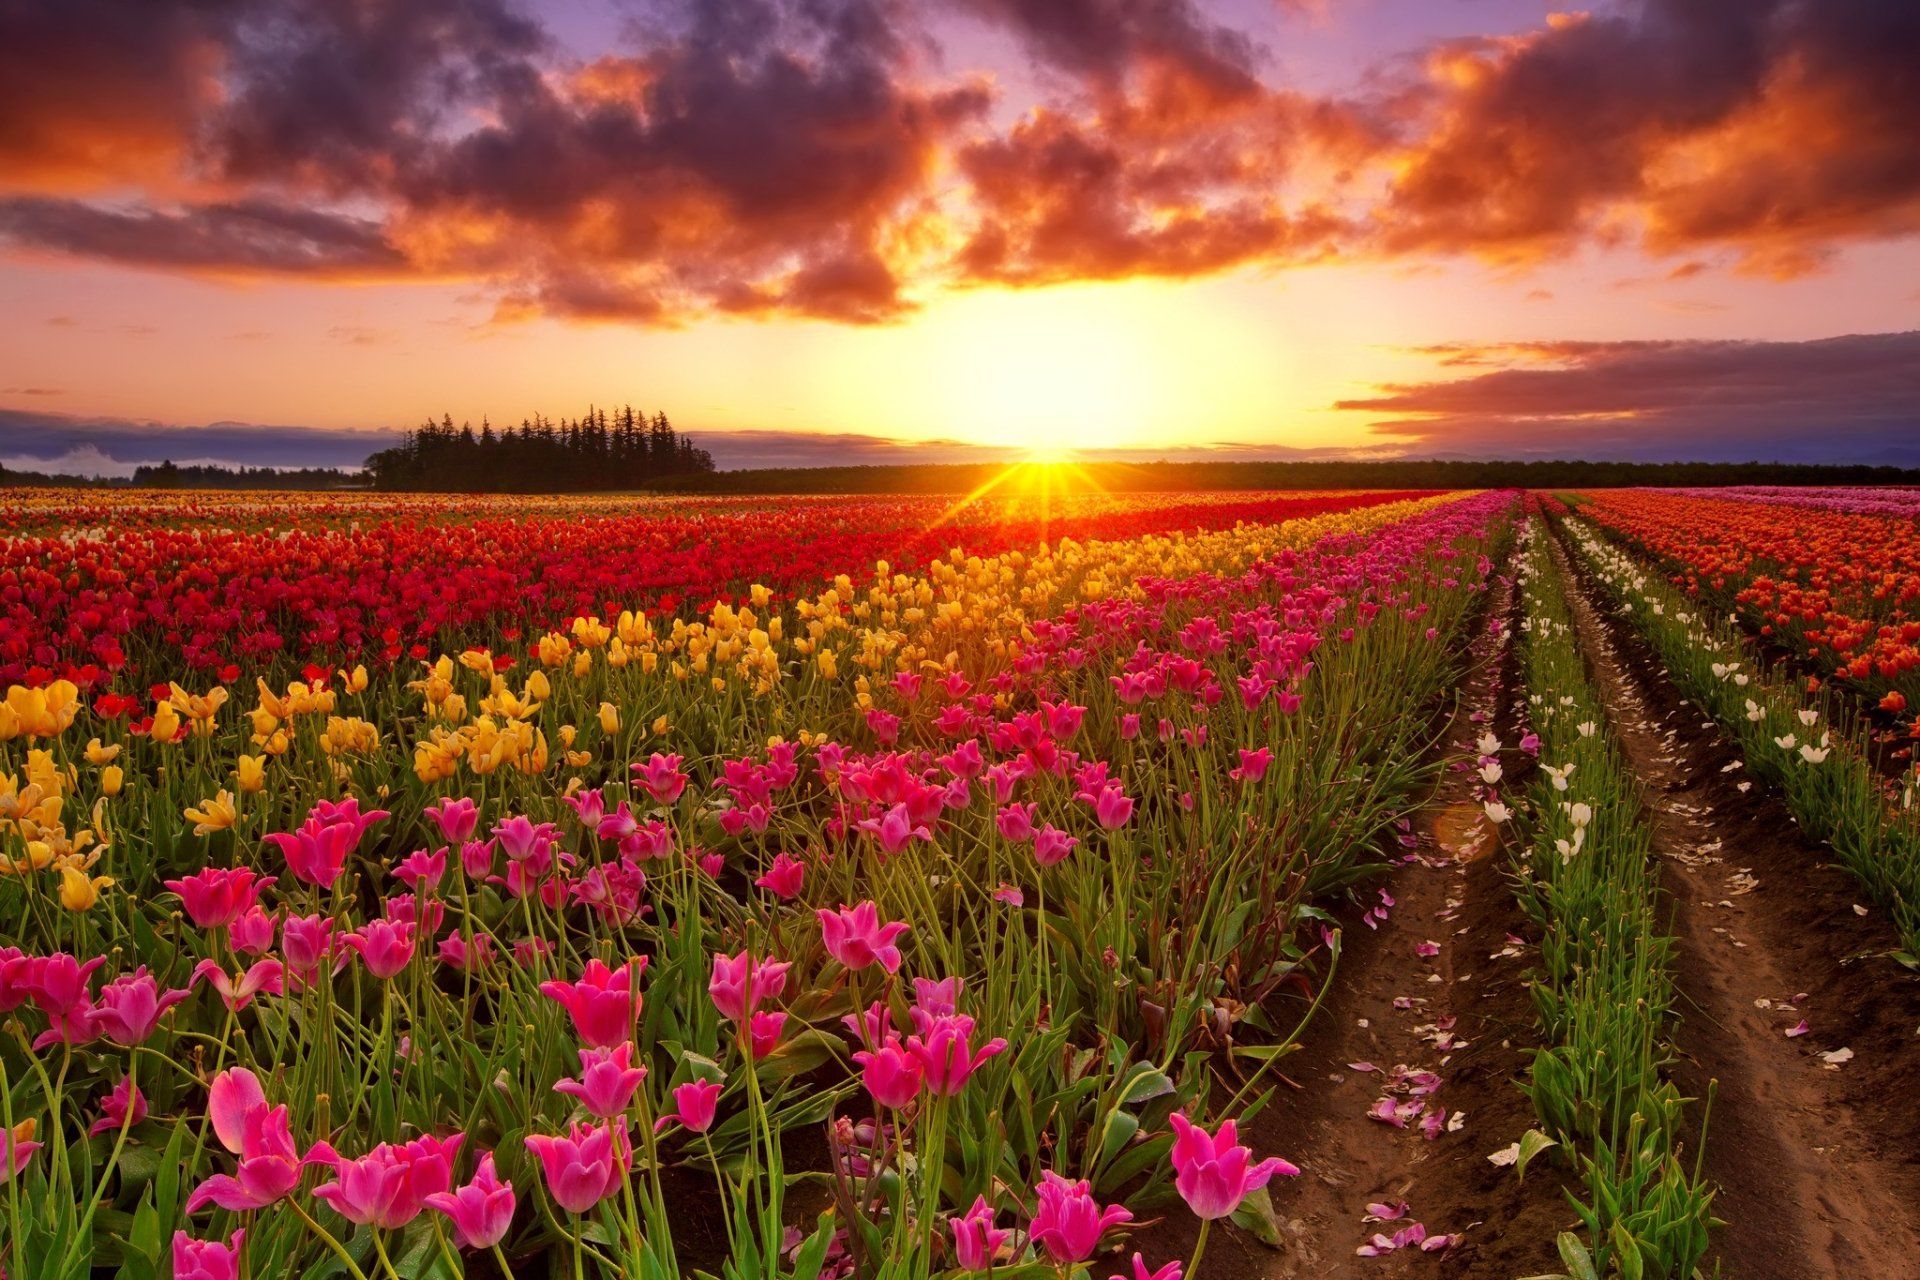 Tulip Field at Sunset Wallpaper Background Image. View, download, comment, and rate. Sunset wallpaper, Tulips, Background image